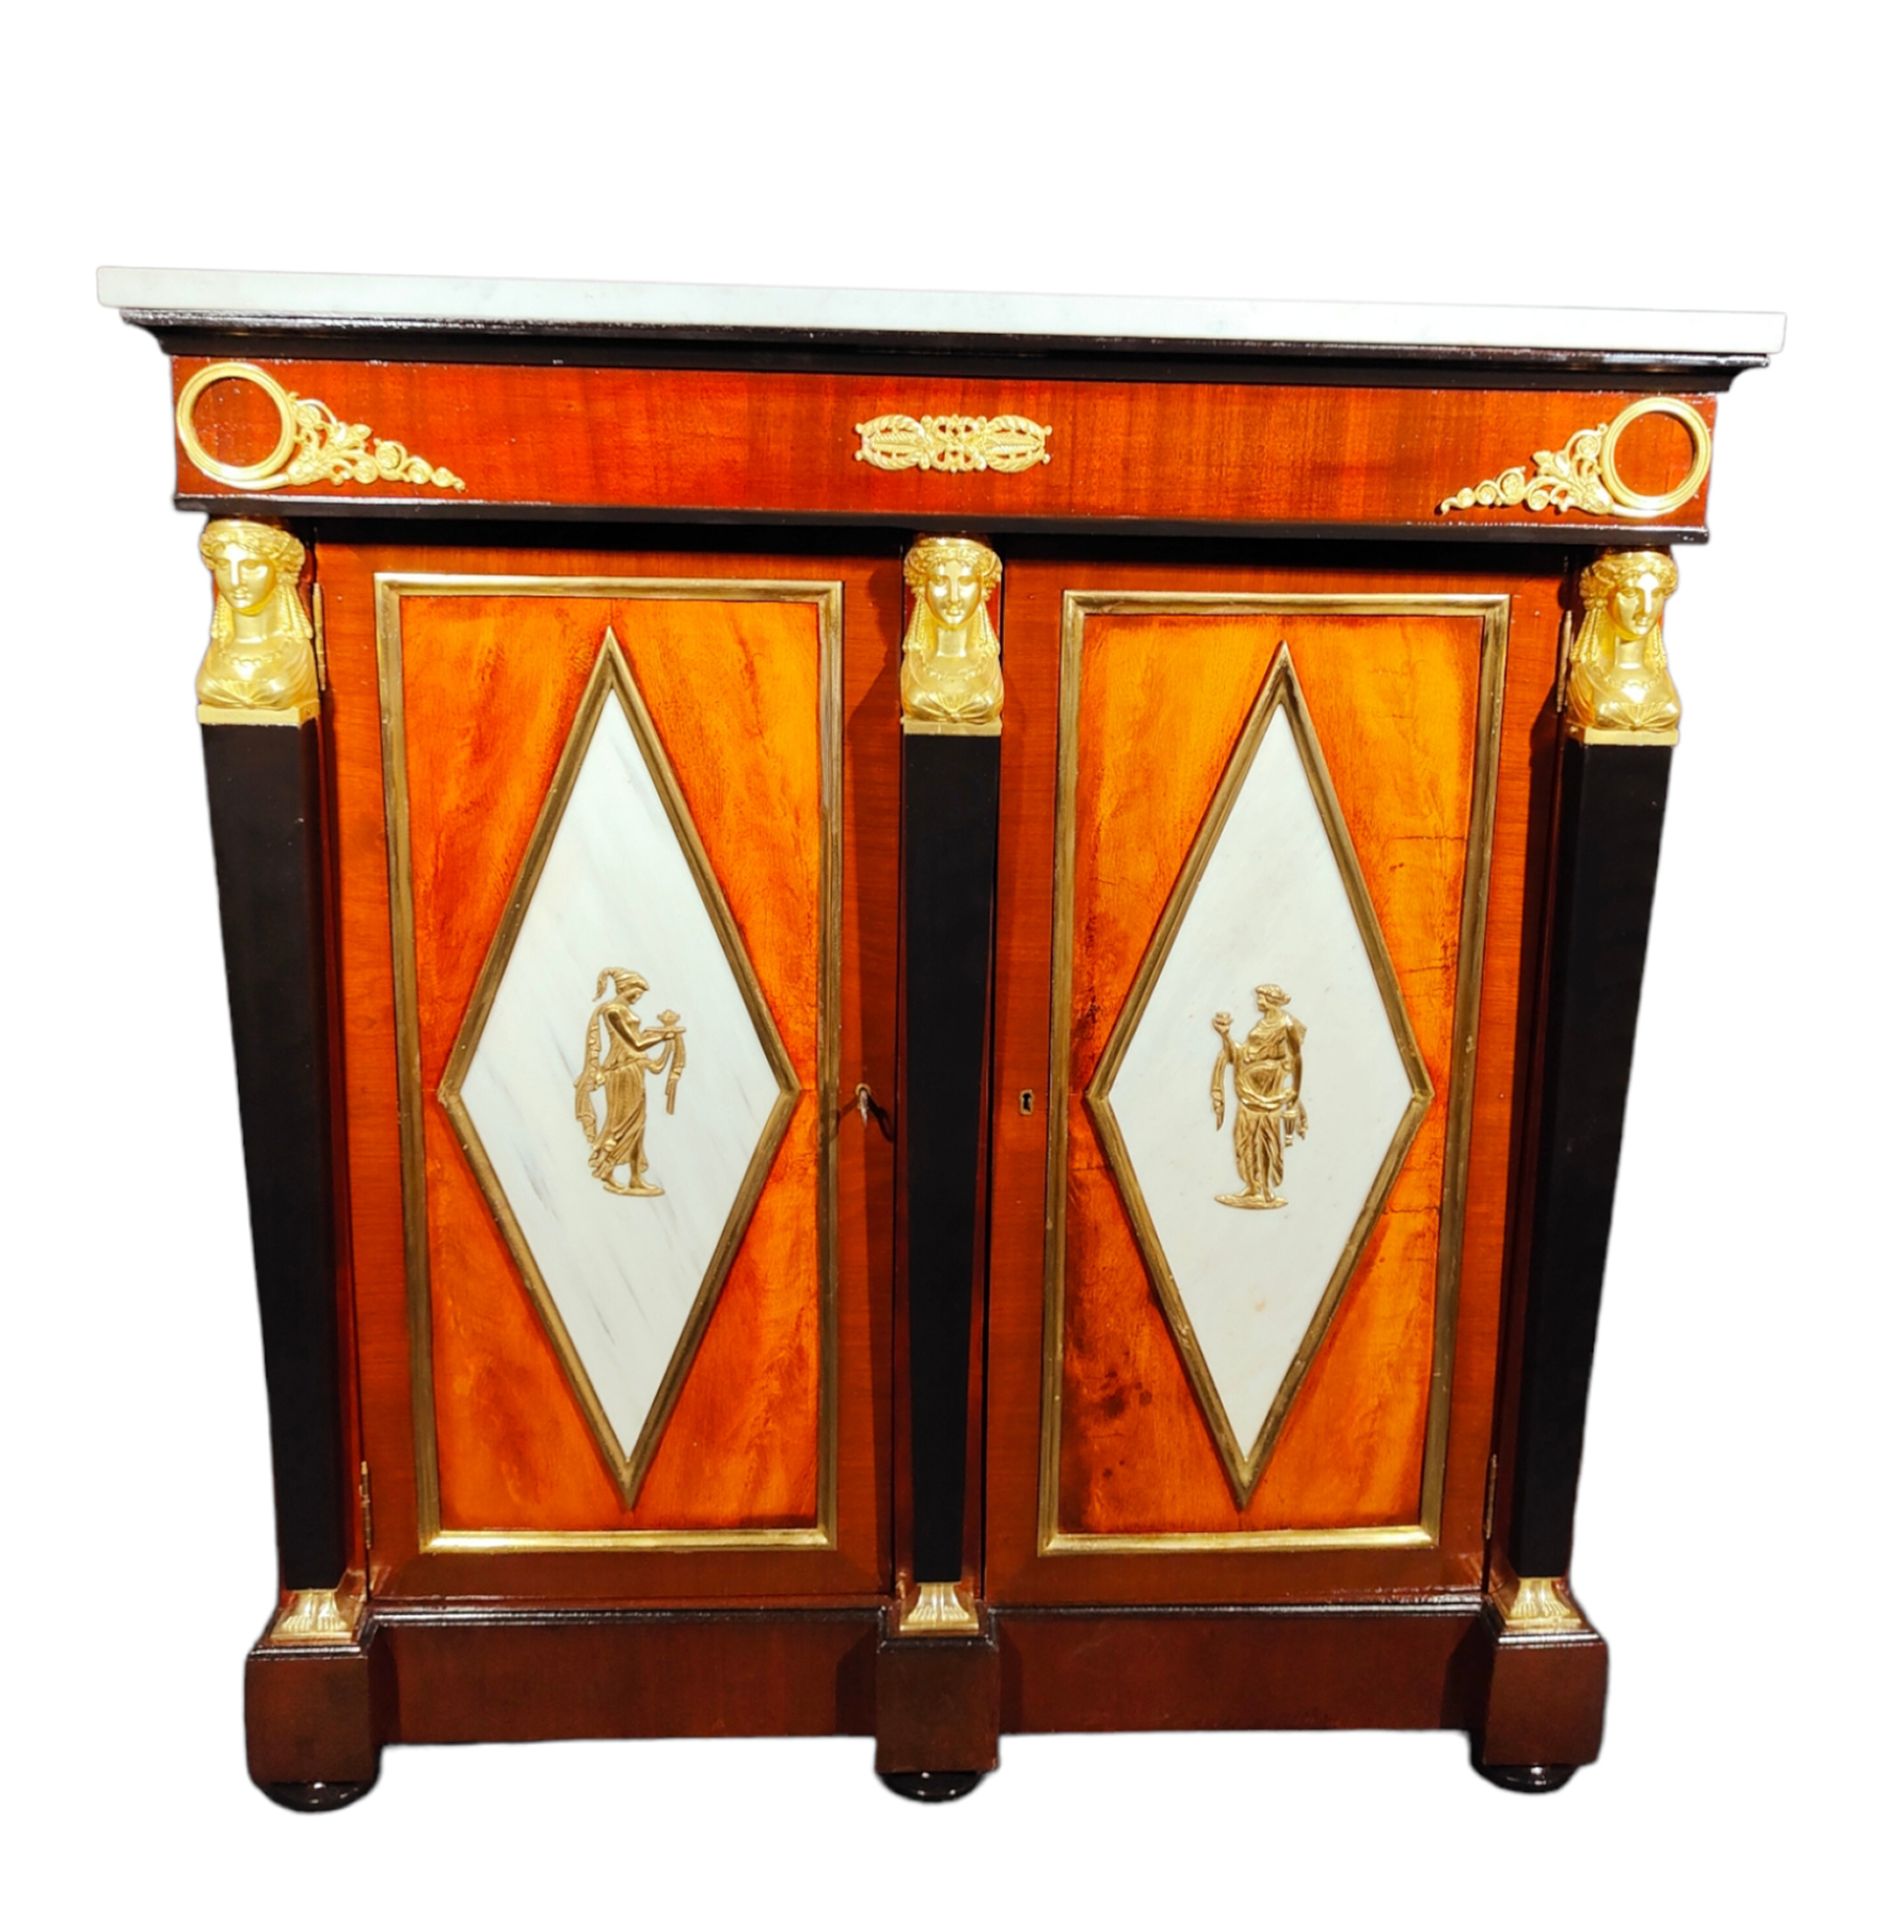 Elegant French Empire style sideboard, 19th century